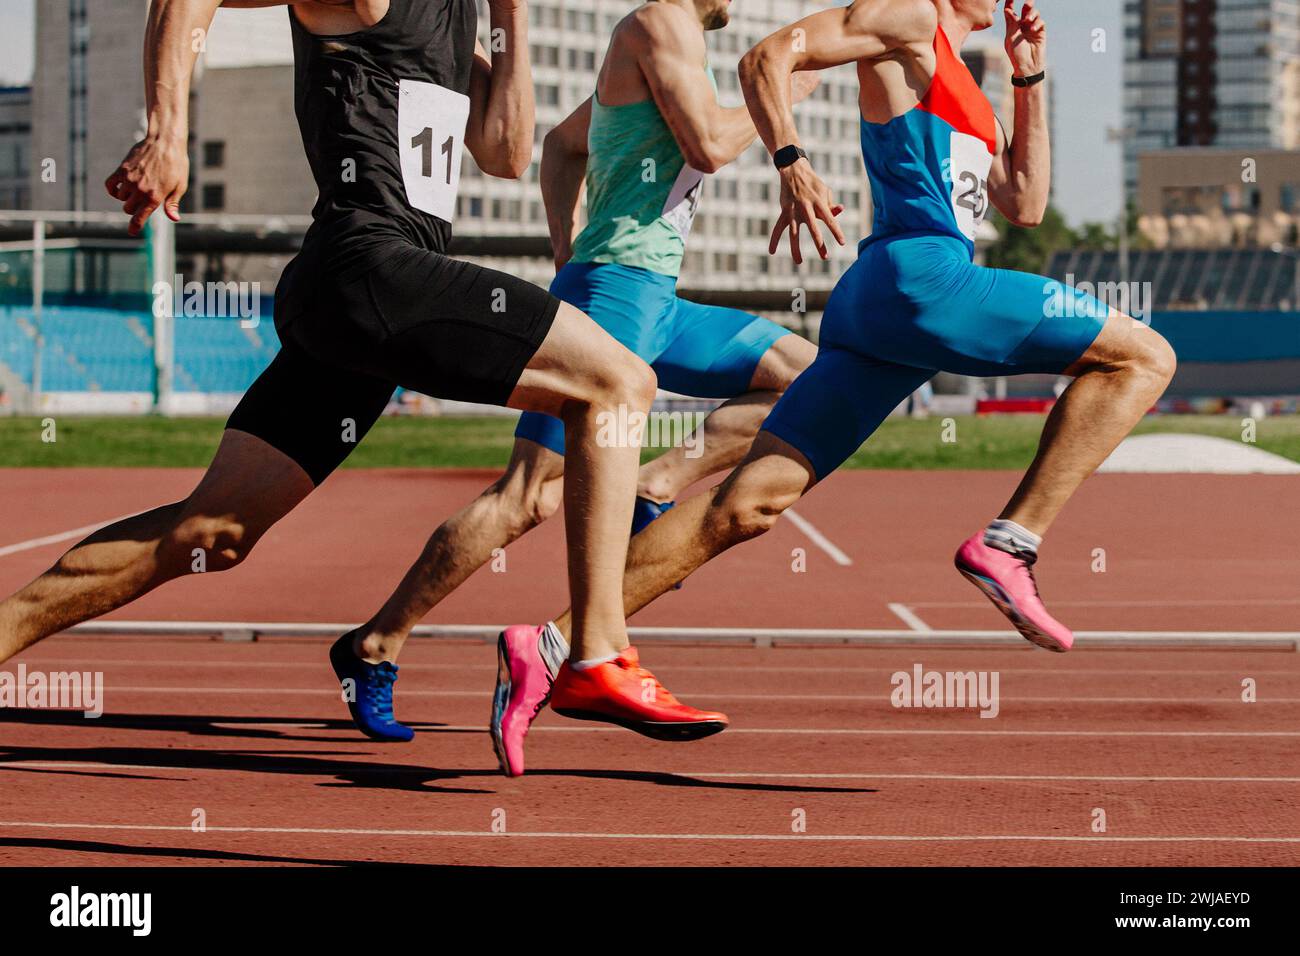 three male athletes sprinting on red track, muscles taut, competing fiercely Stock Photo